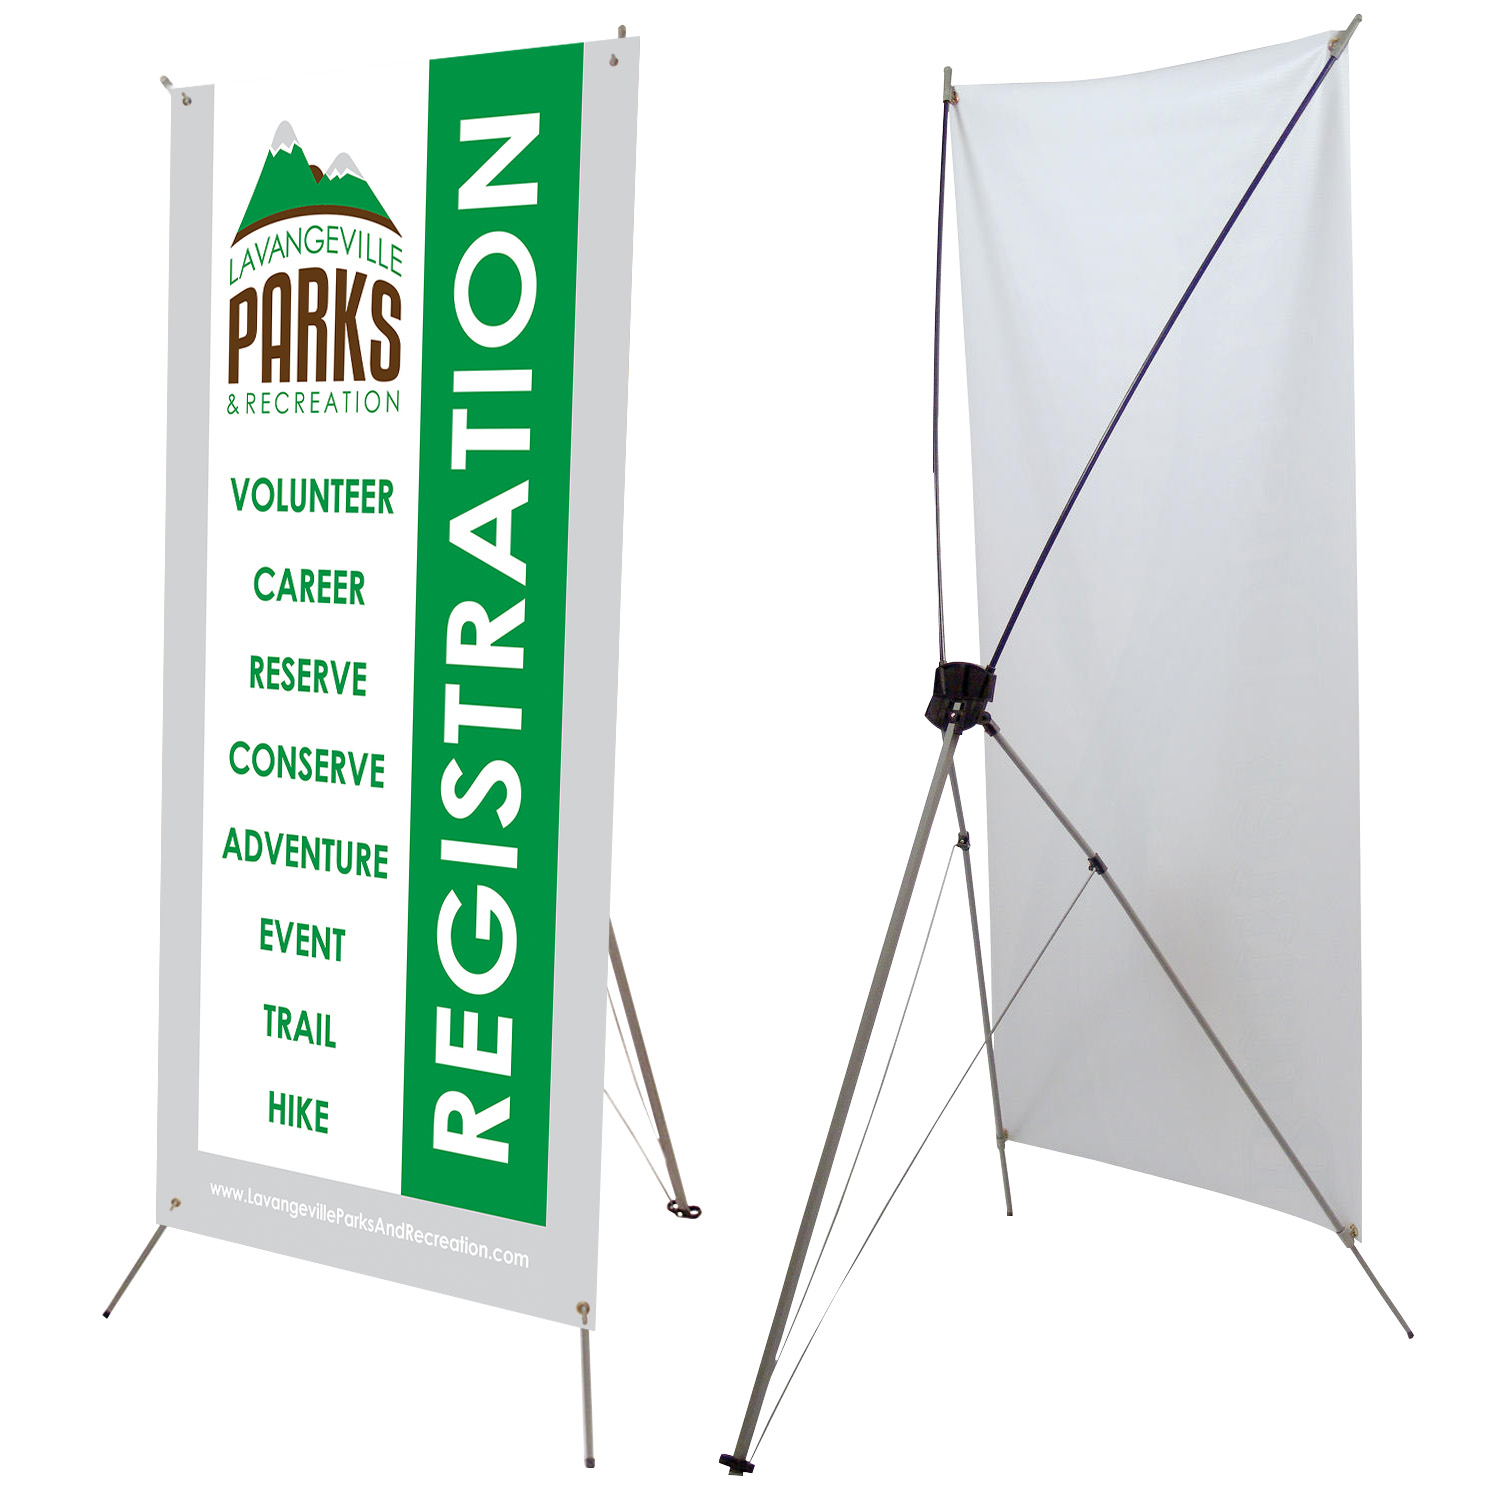 free bag C CL-X-C X banner stand sign display size adjustable up to 31" x 71" 